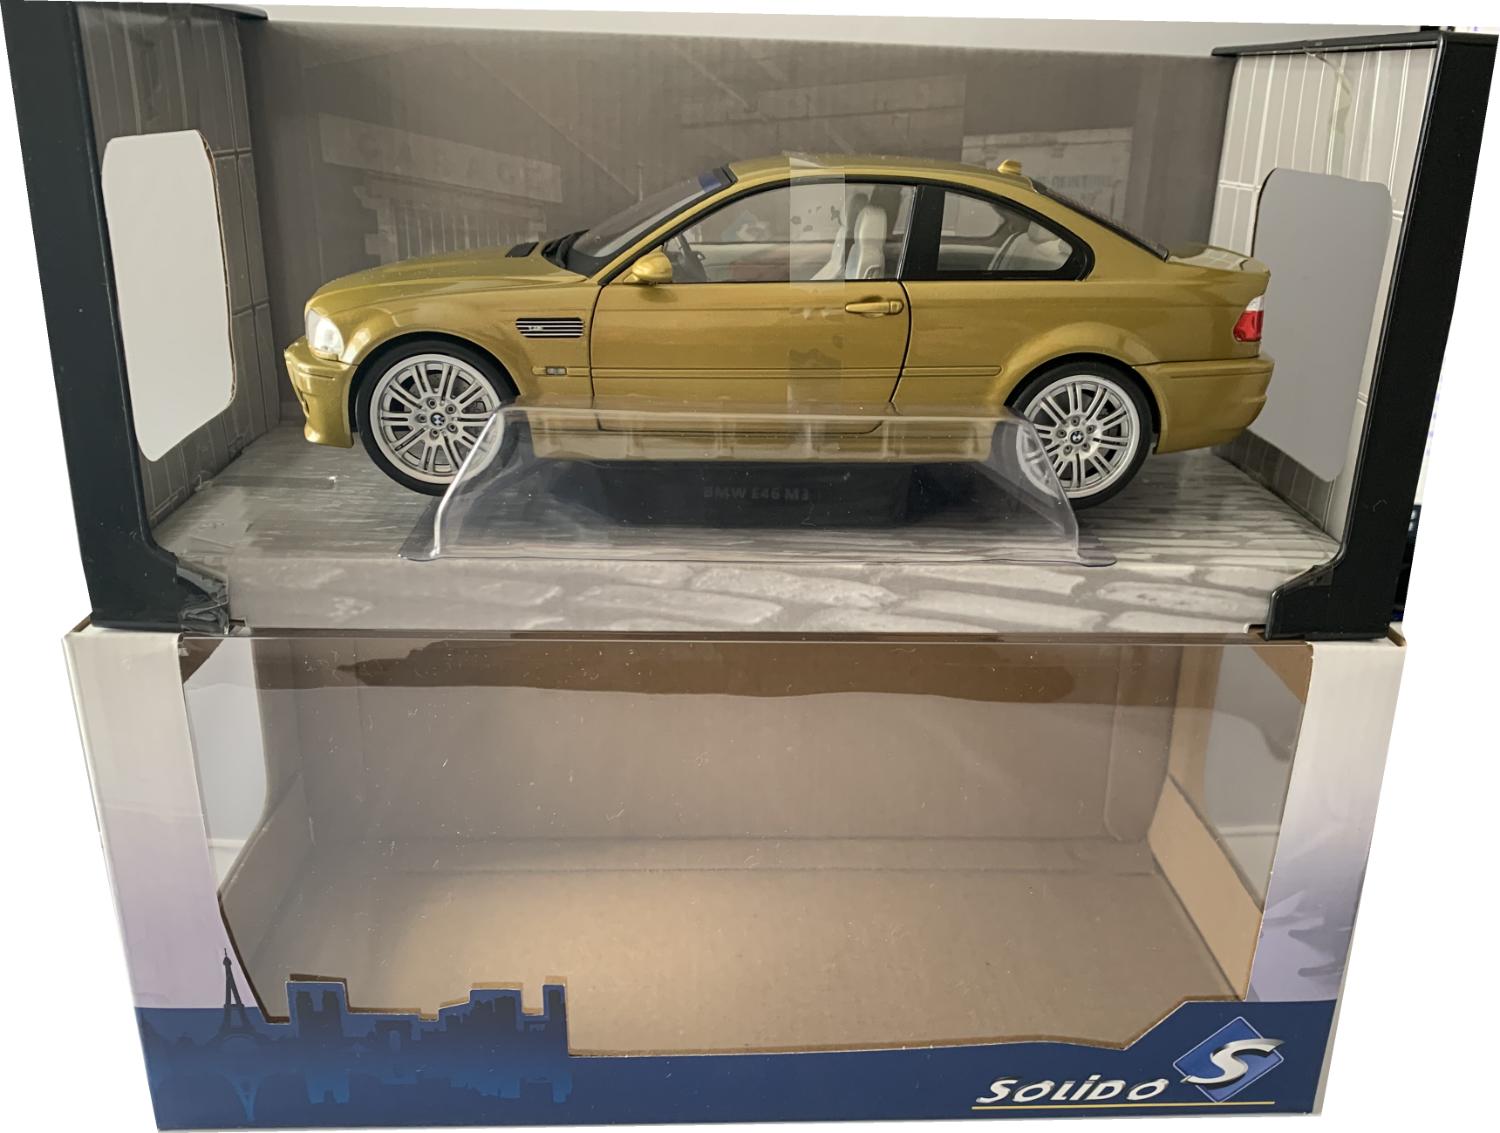 An excellent scale model of the BMW E46 Coupe M3 with high level of detail throughout, all authentically recreated.  Model is presented in a window display box.  The car is approx. 24 cm long and the presentation box is 31 cm long